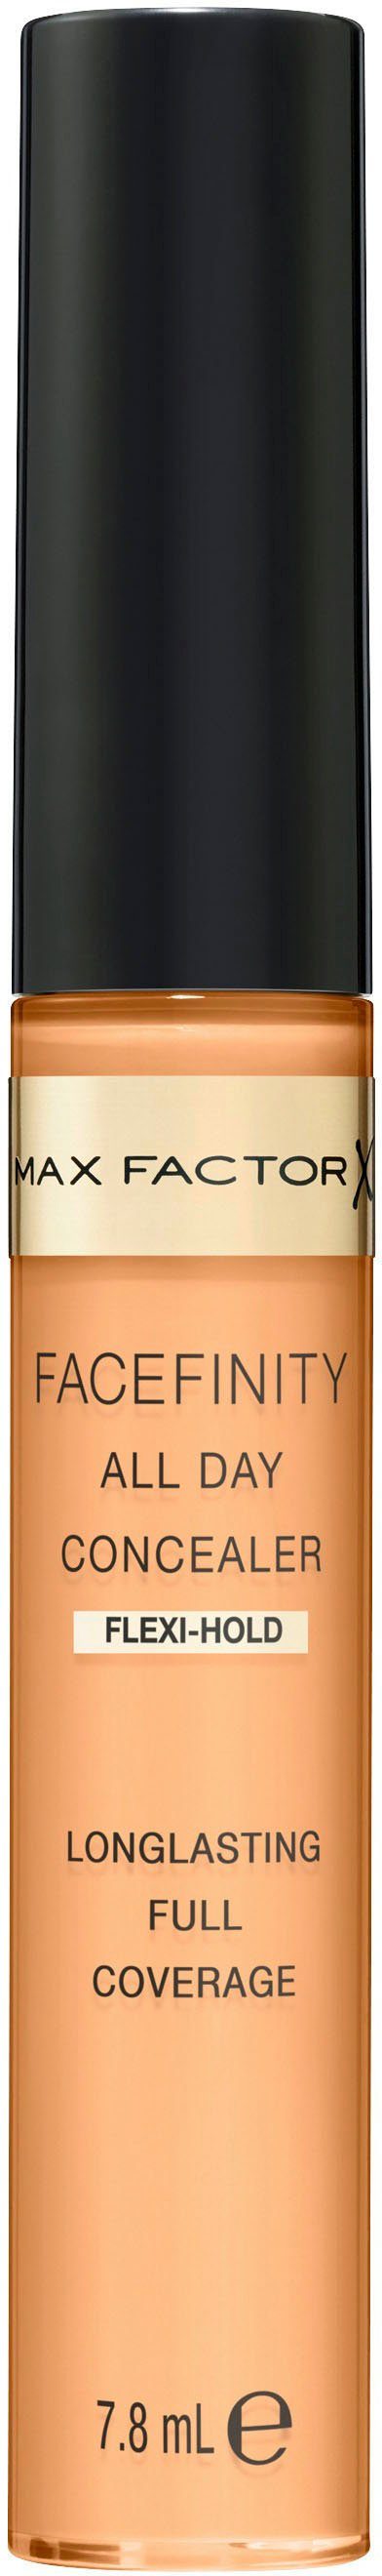 FACEFINITY All FACTOR Concealer 70 Day MAX Flawless